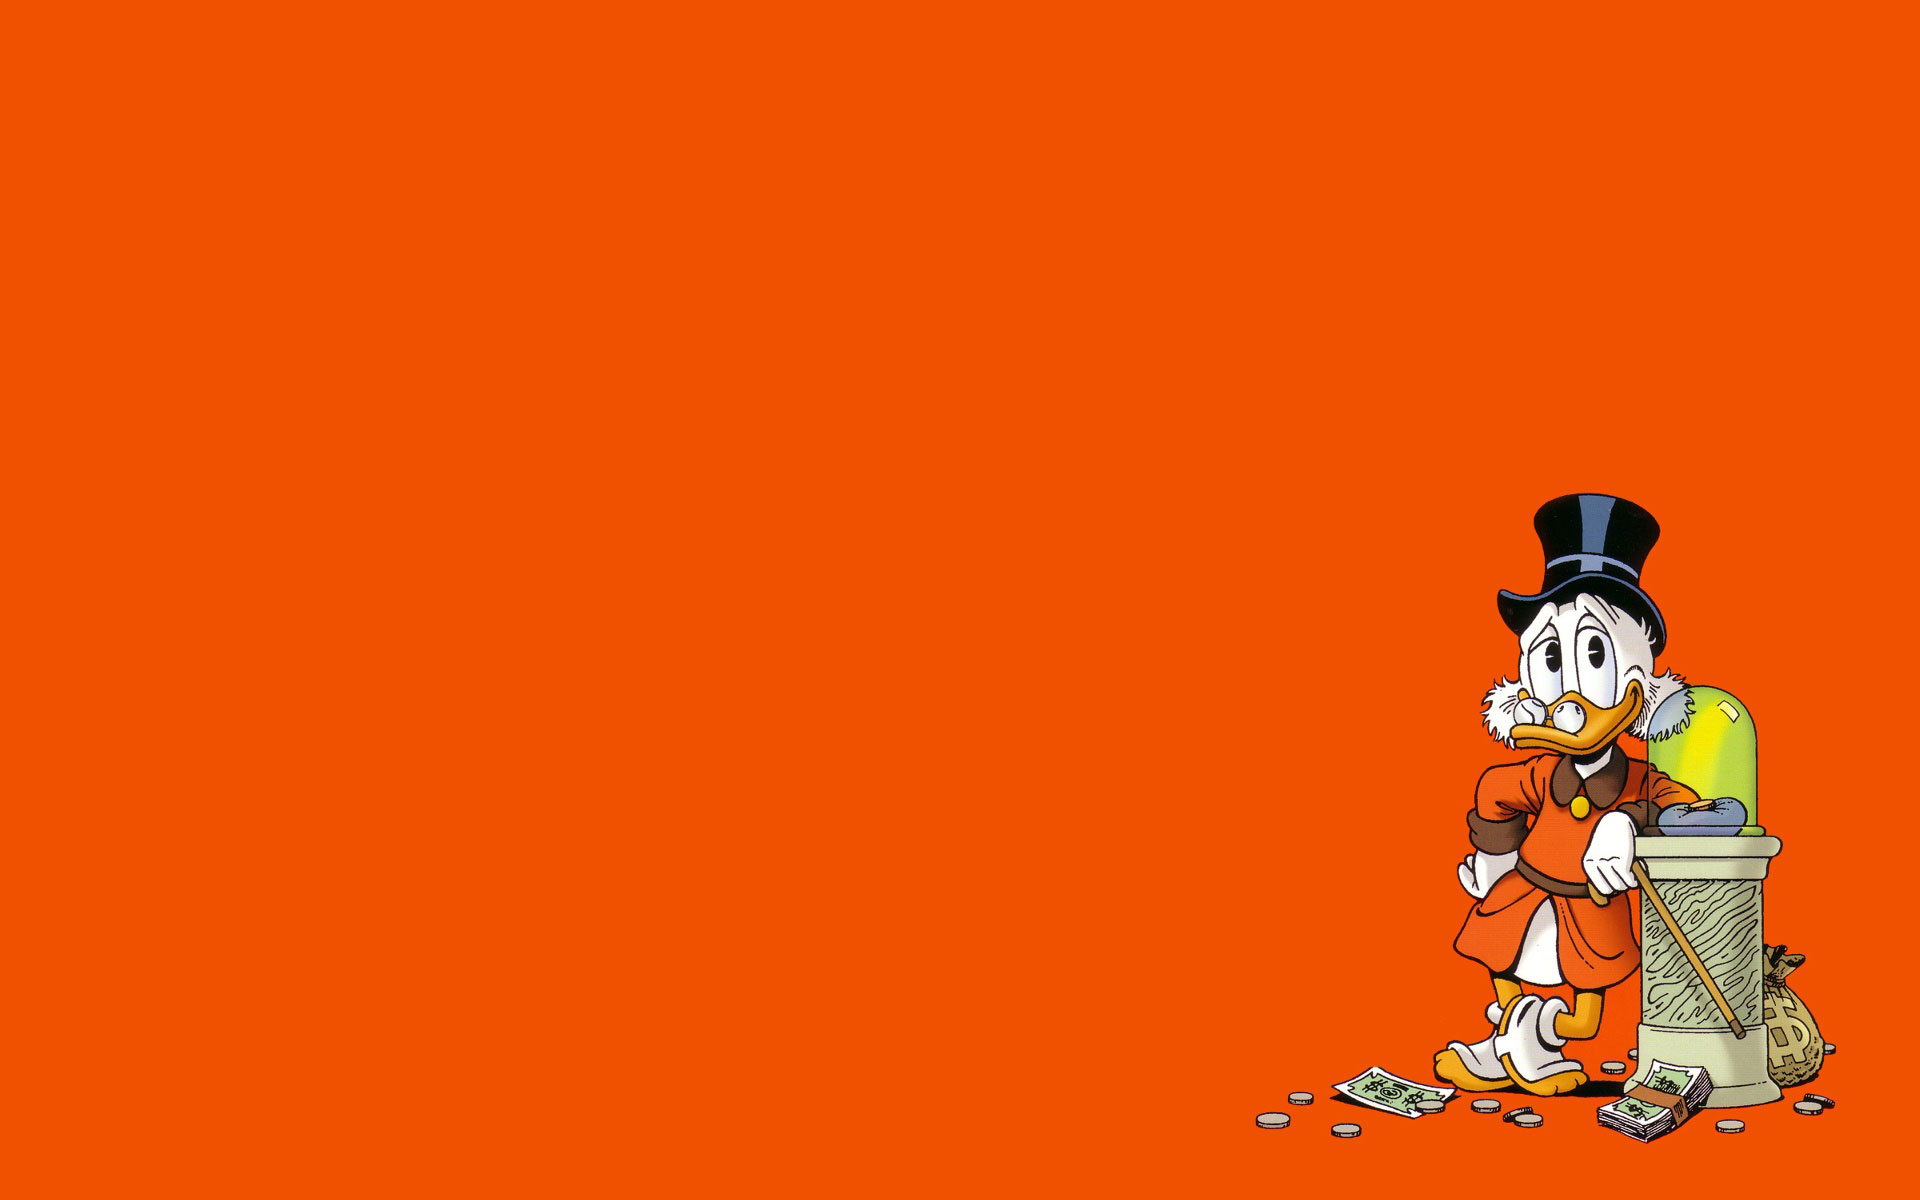 Download The Life And Times Of Scrooge Mcduck wallpapers for mobile phone, free The Life And Times Of Scrooge Mcduck HD pictures